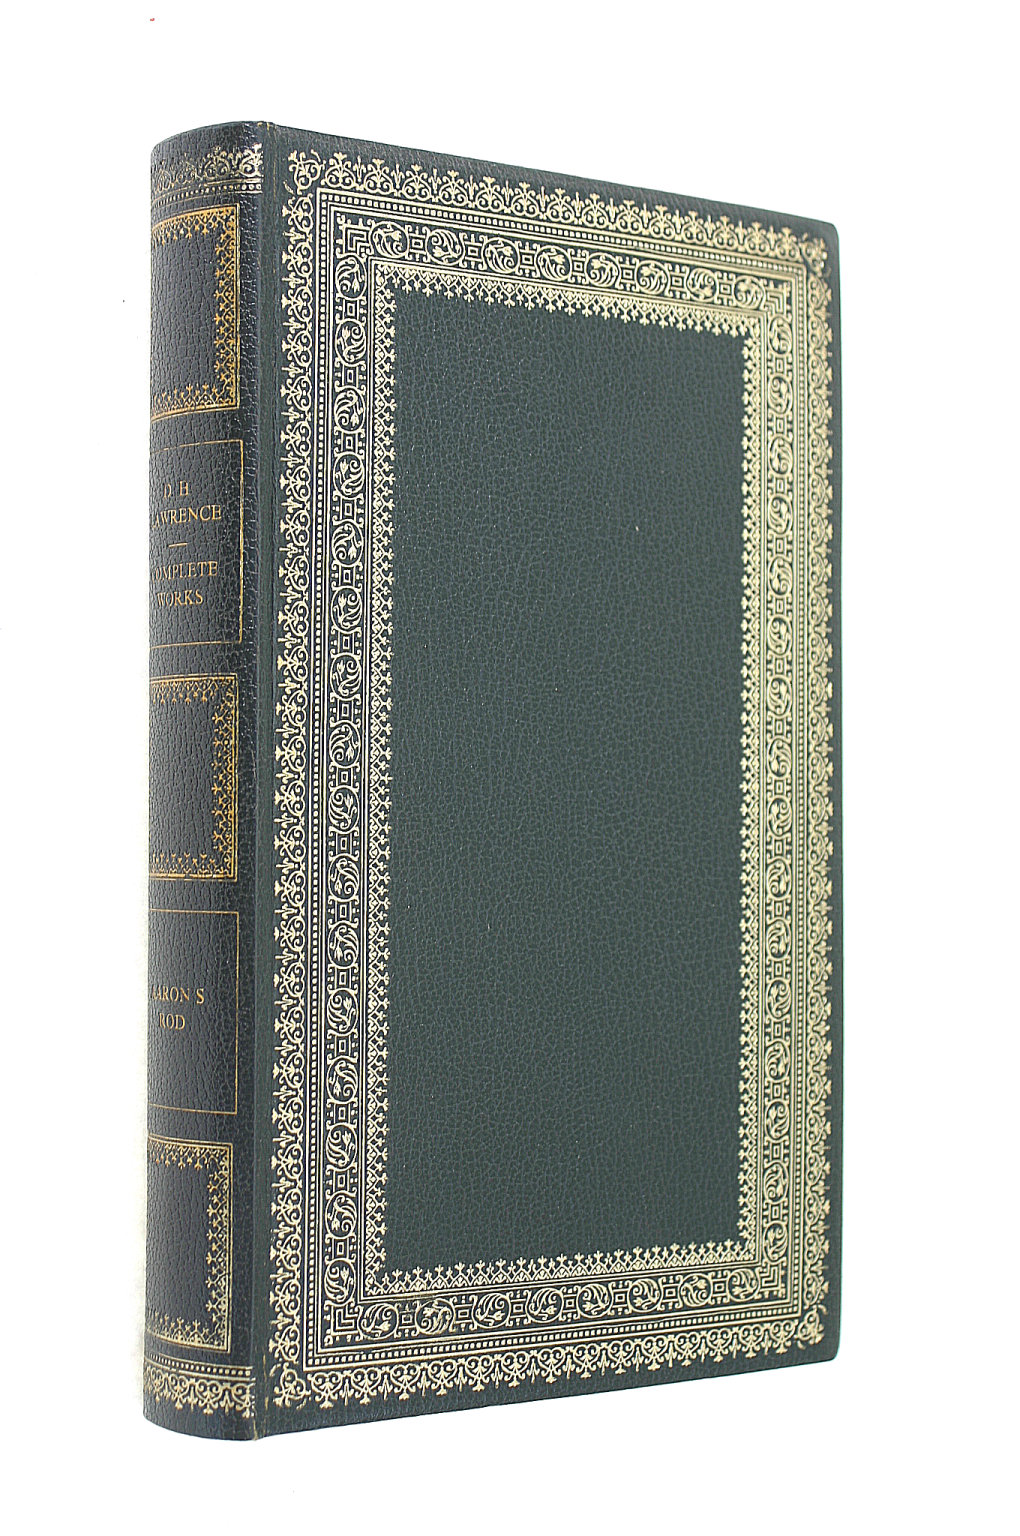 LAWRENCE, D.H. - Aaron's Rod. Heron Collected Works of D H Lawrence